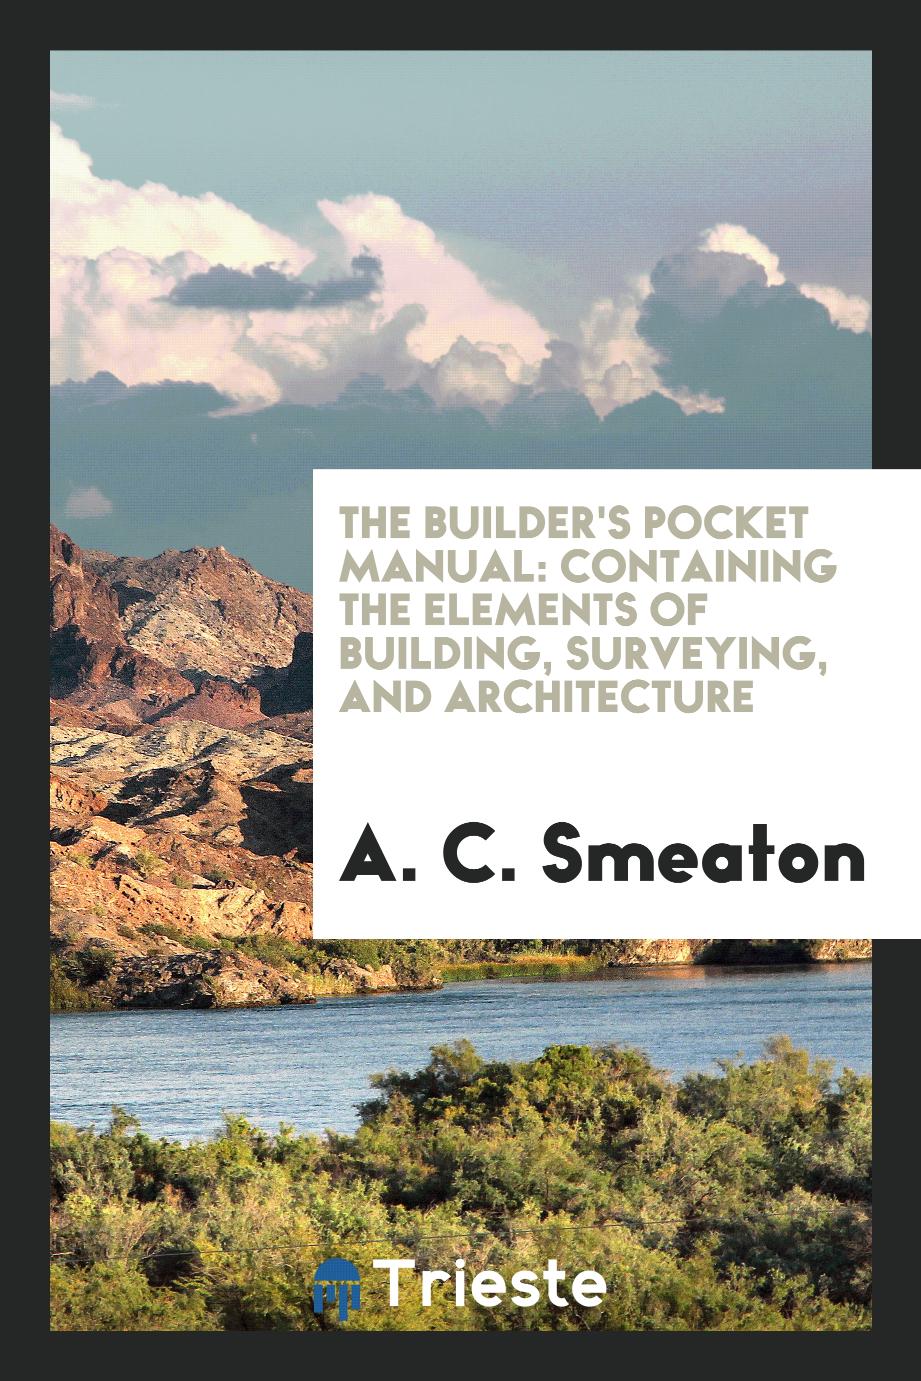 The Builder's Pocket Manual: Containing the Elements of Building, Surveying, and Architecture